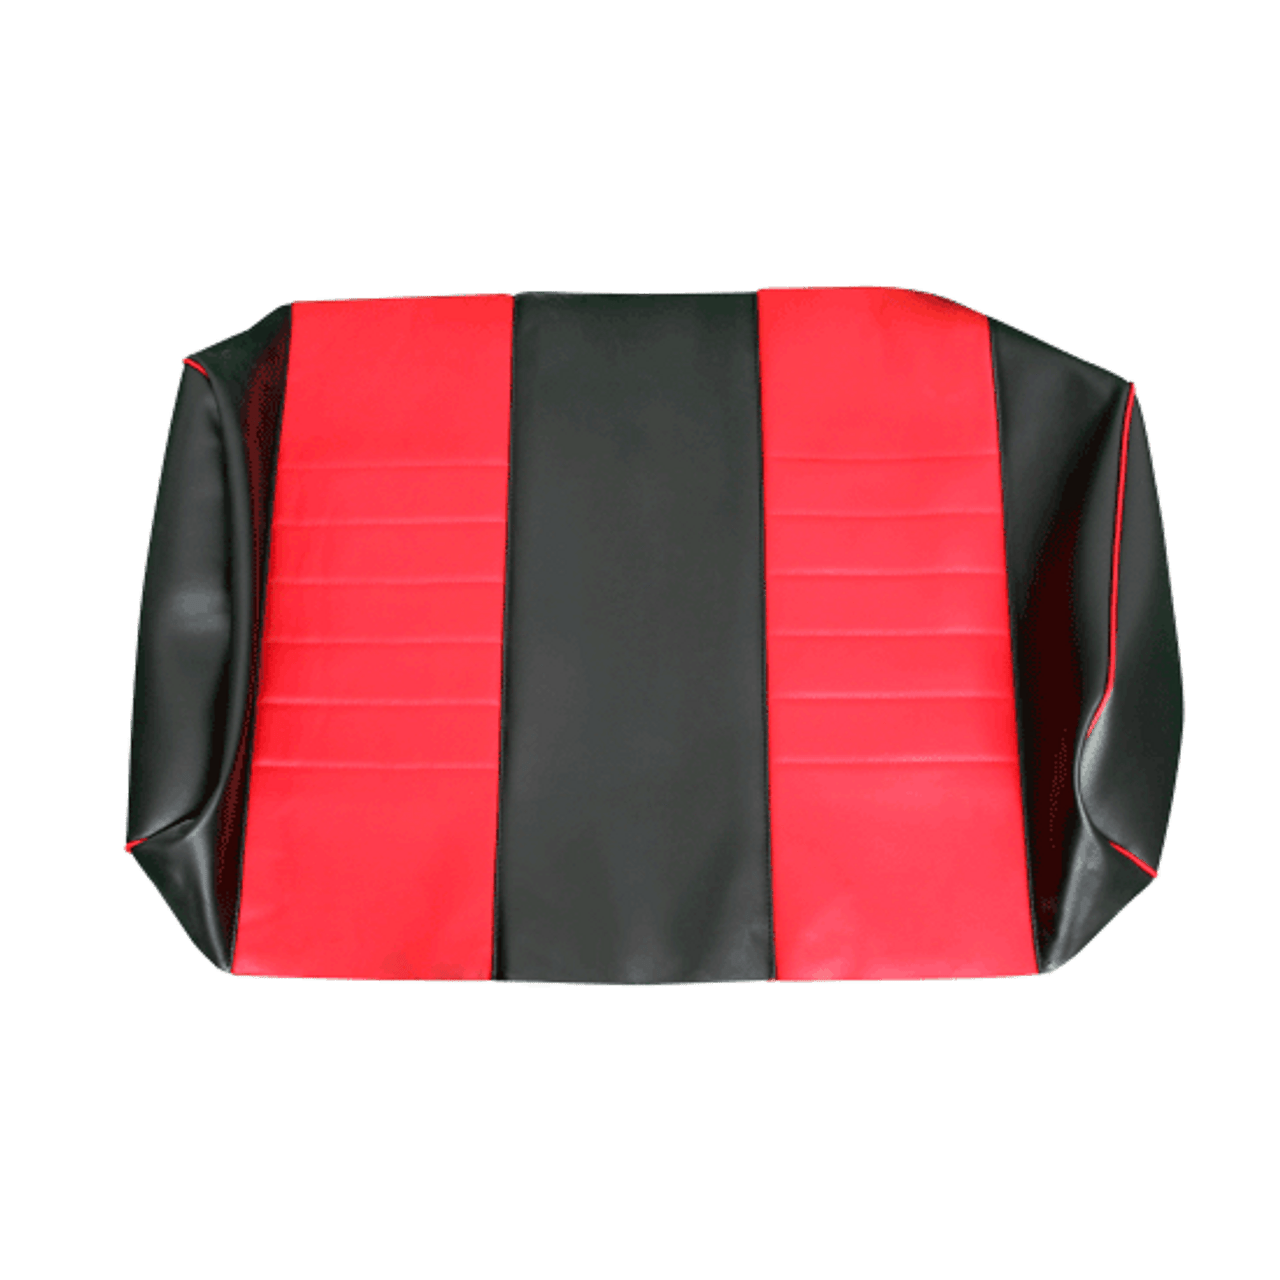 2.03.1078 SEAT SKIN FOR REAR SEAT, RED & BLACK

On your purchase from Evolution Electric Vehicle, Evolution is your source for most extensive selection of golf cart parts and accessories in the industry.

Apply to (Vehicle Type）：

CLASSIC 2/4 PLUS PRO
CARRIER 6/8 PLUS
FORESTER 4/6 PLUS
TURFMAN 200/800/1000